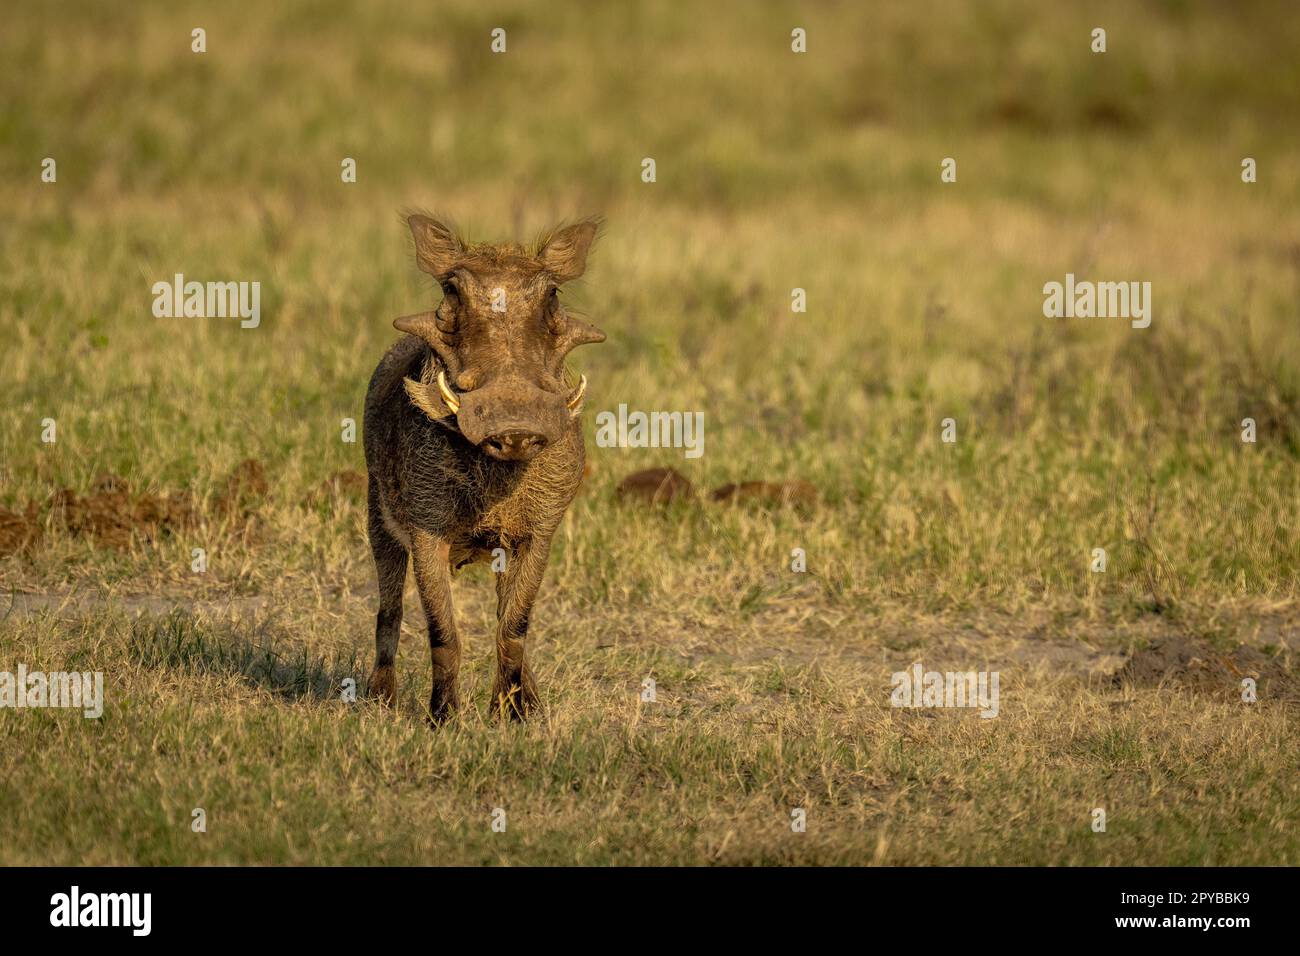 Common warthog stands facing camera casting shadow Stock Photo